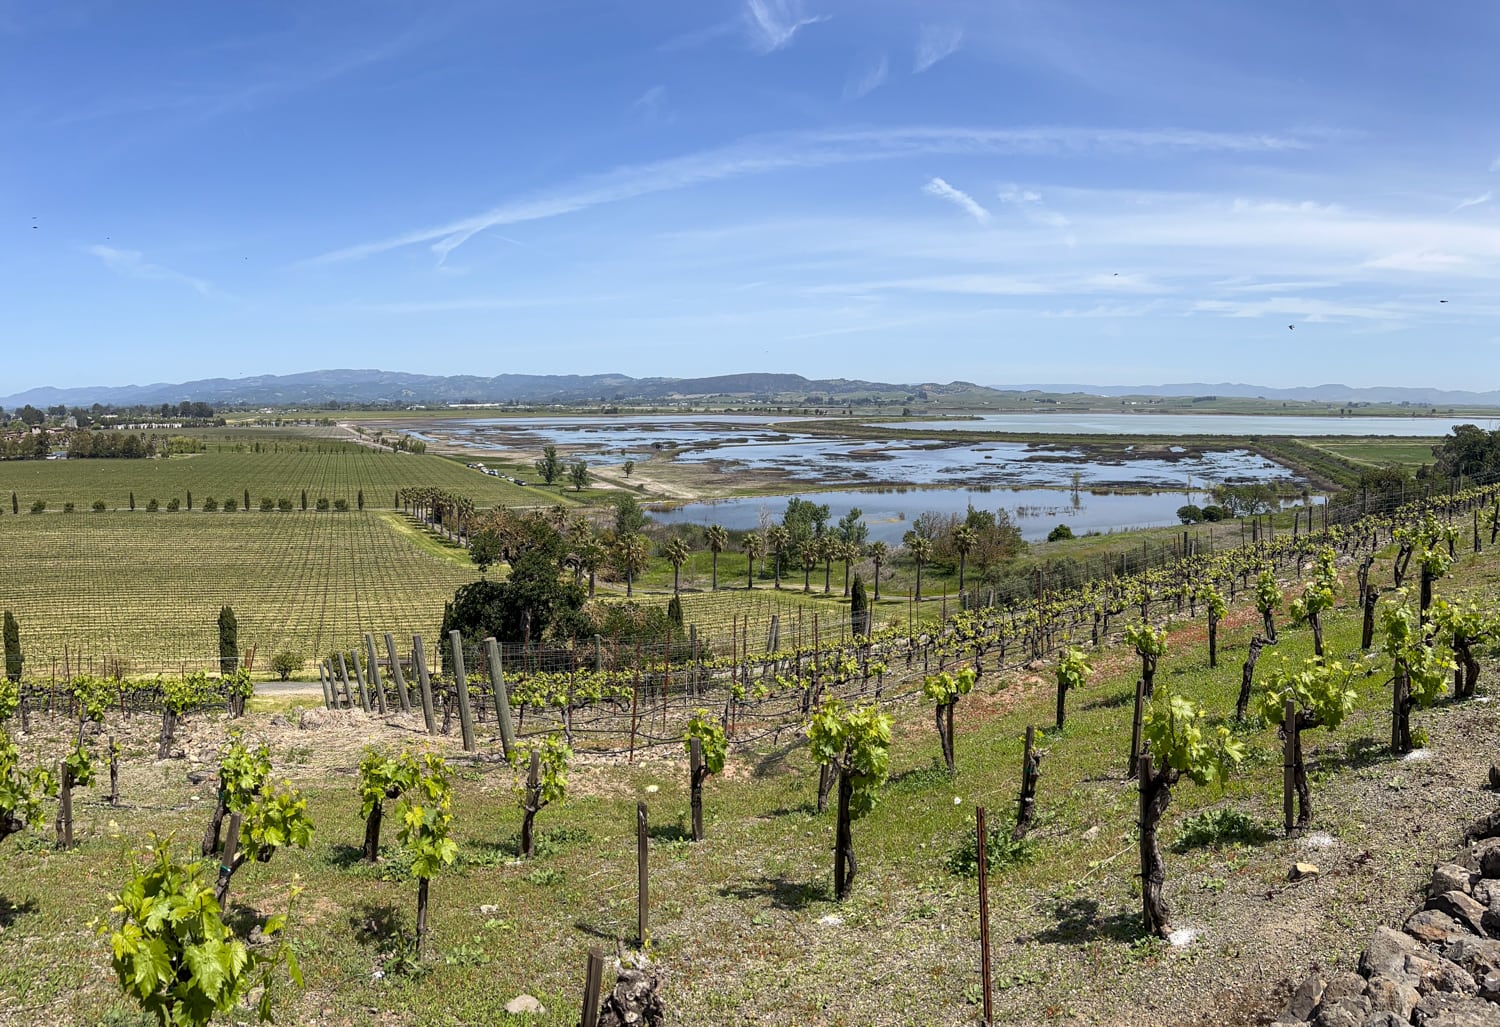 View from Viansa Winery of the wetlands along Sonoma Creek